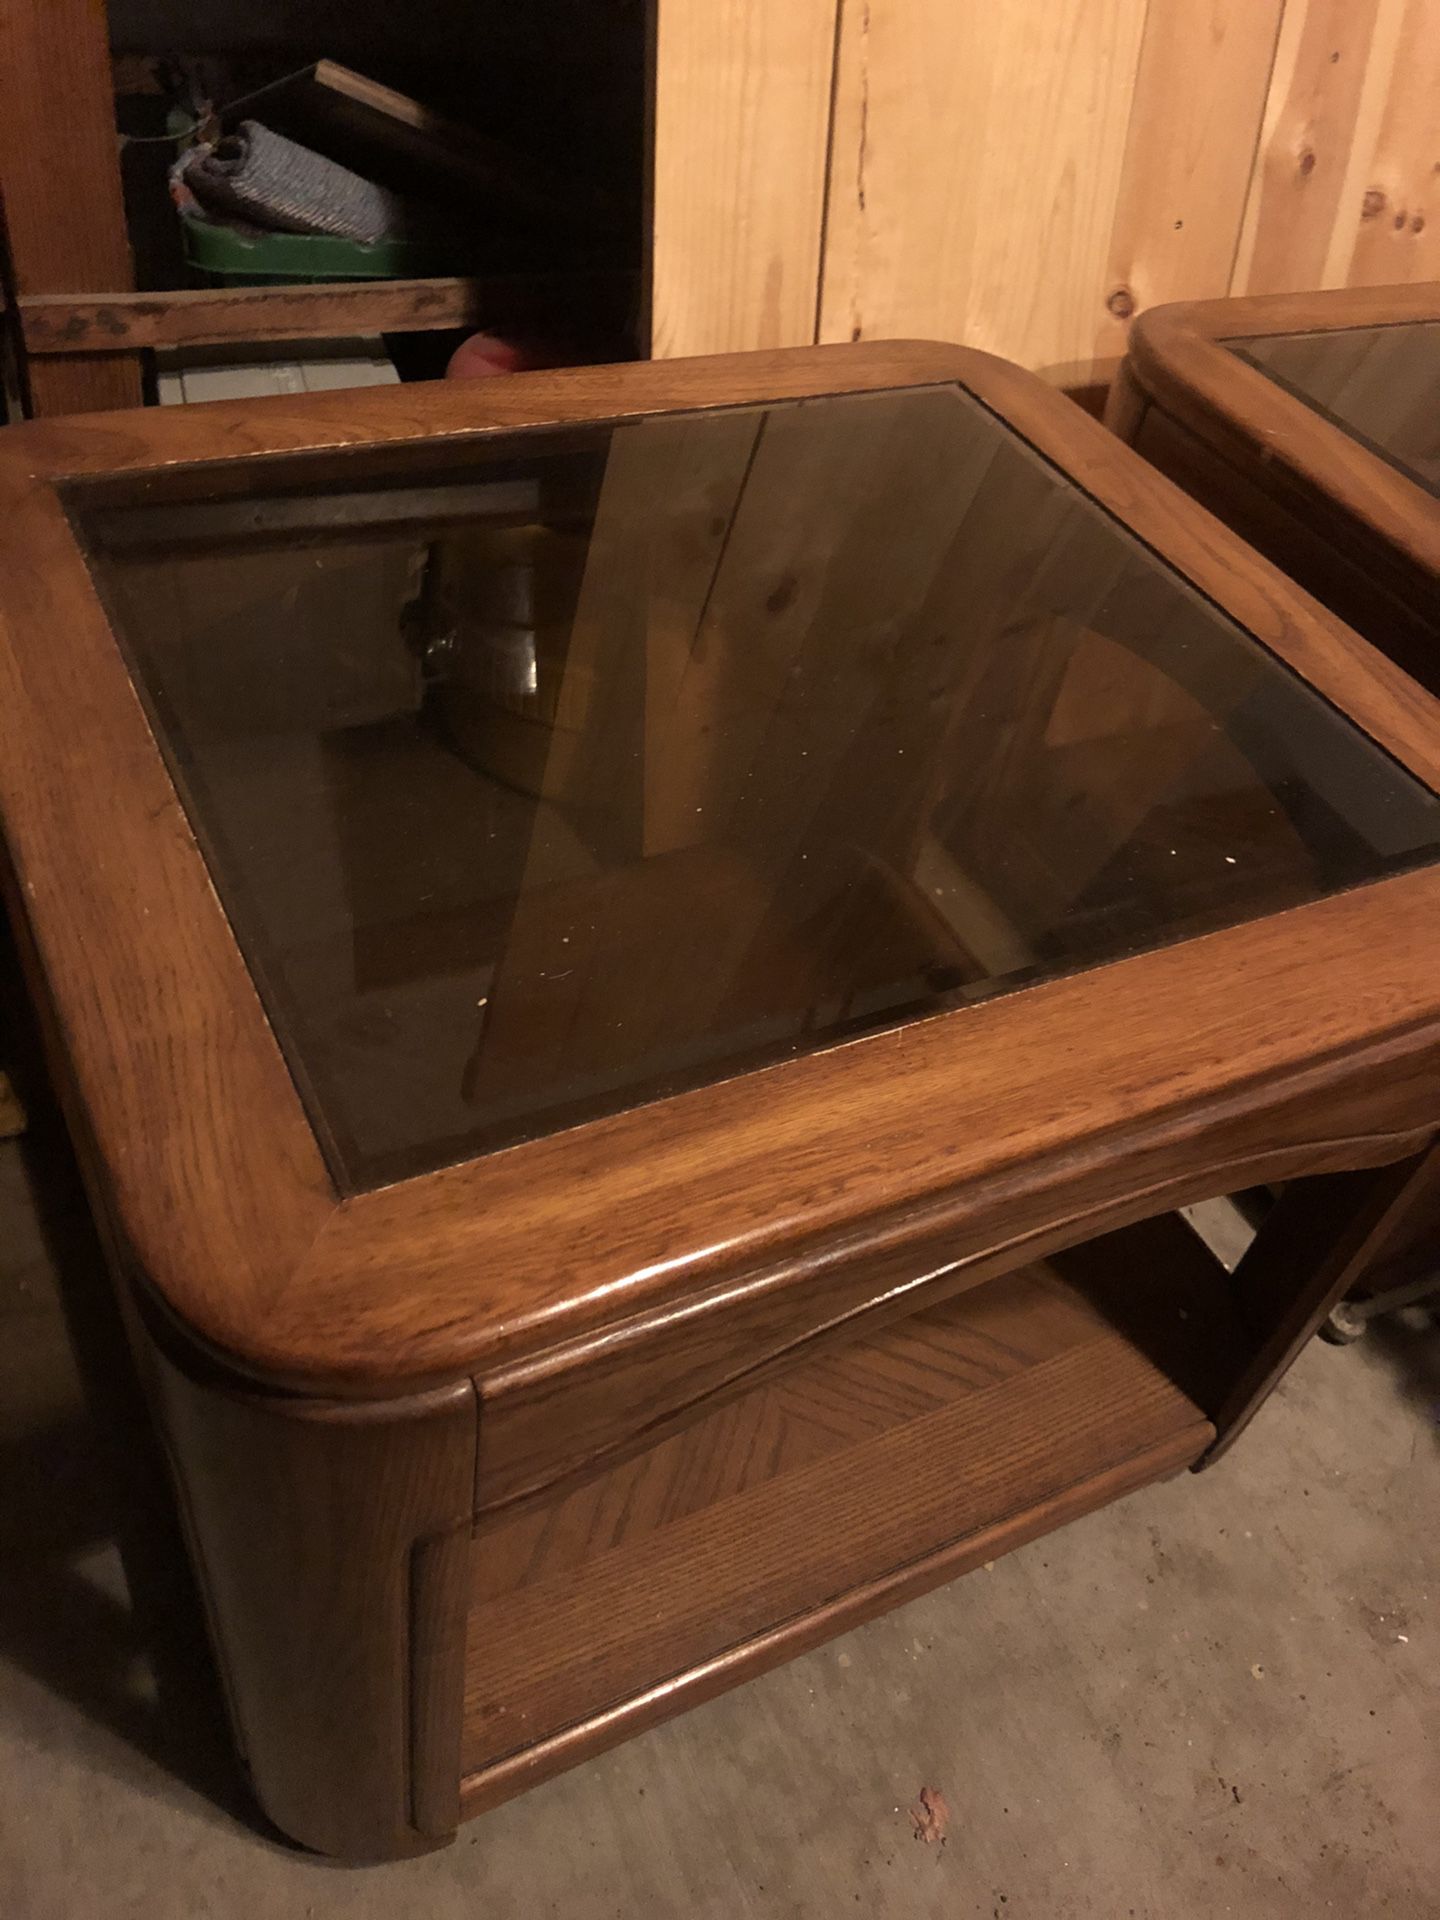 End tables $30